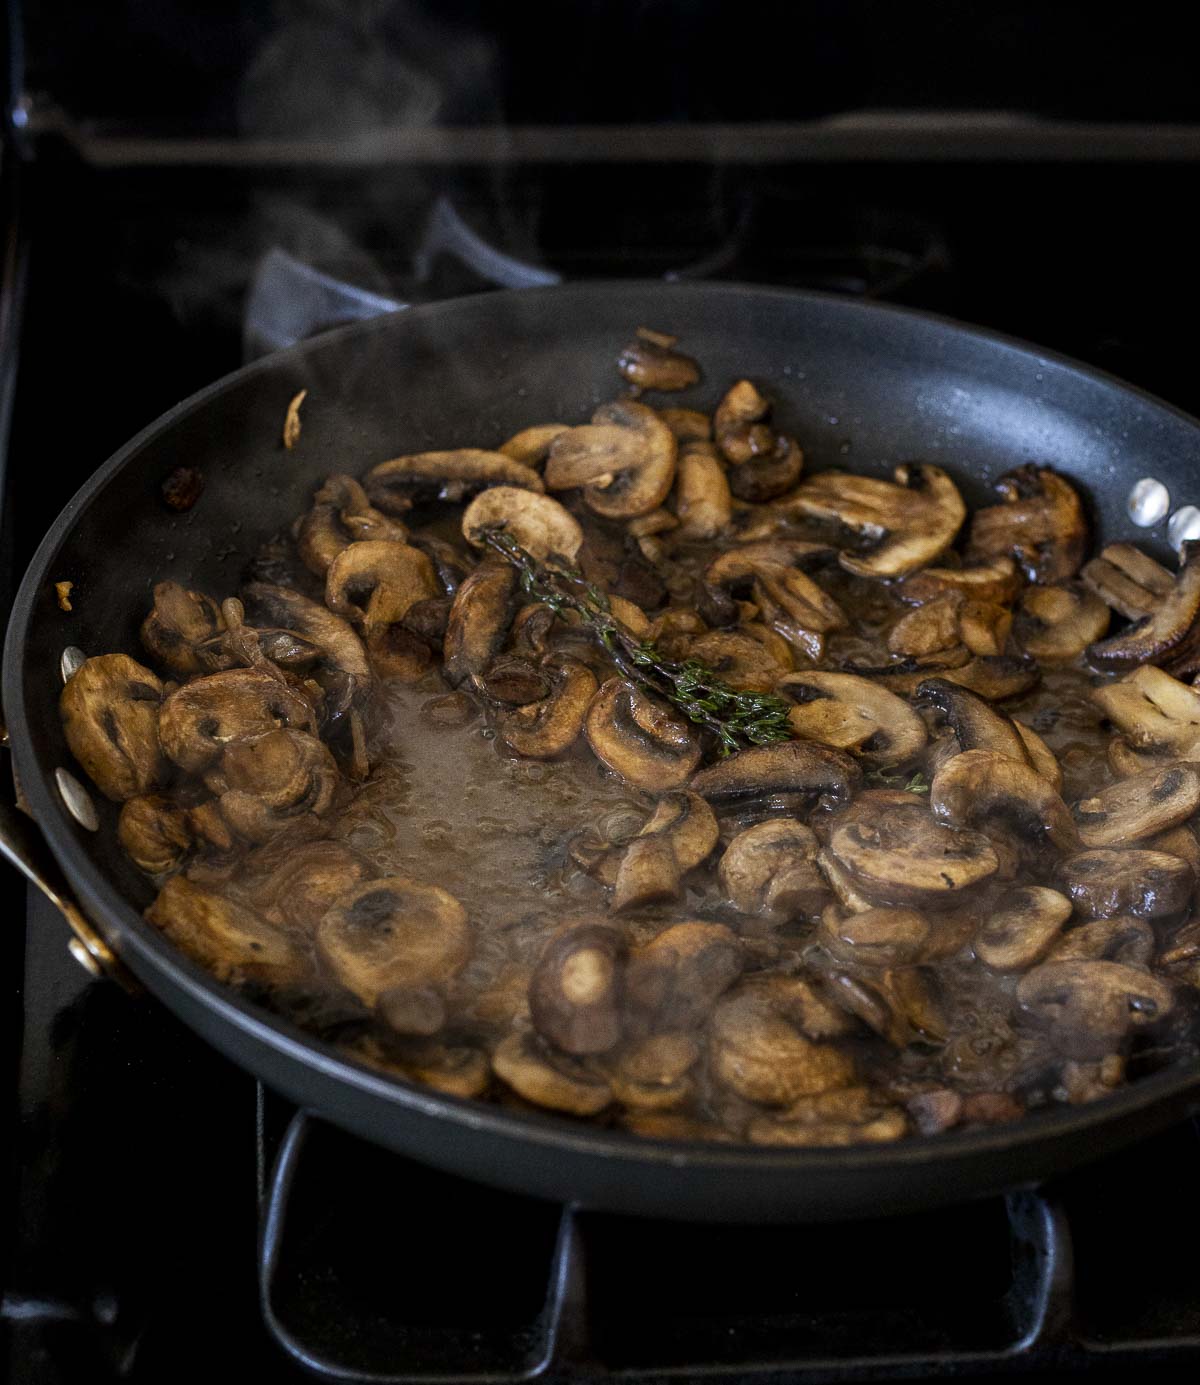 Sherry mushroom sauce cooking in a skillet on the stovetop.